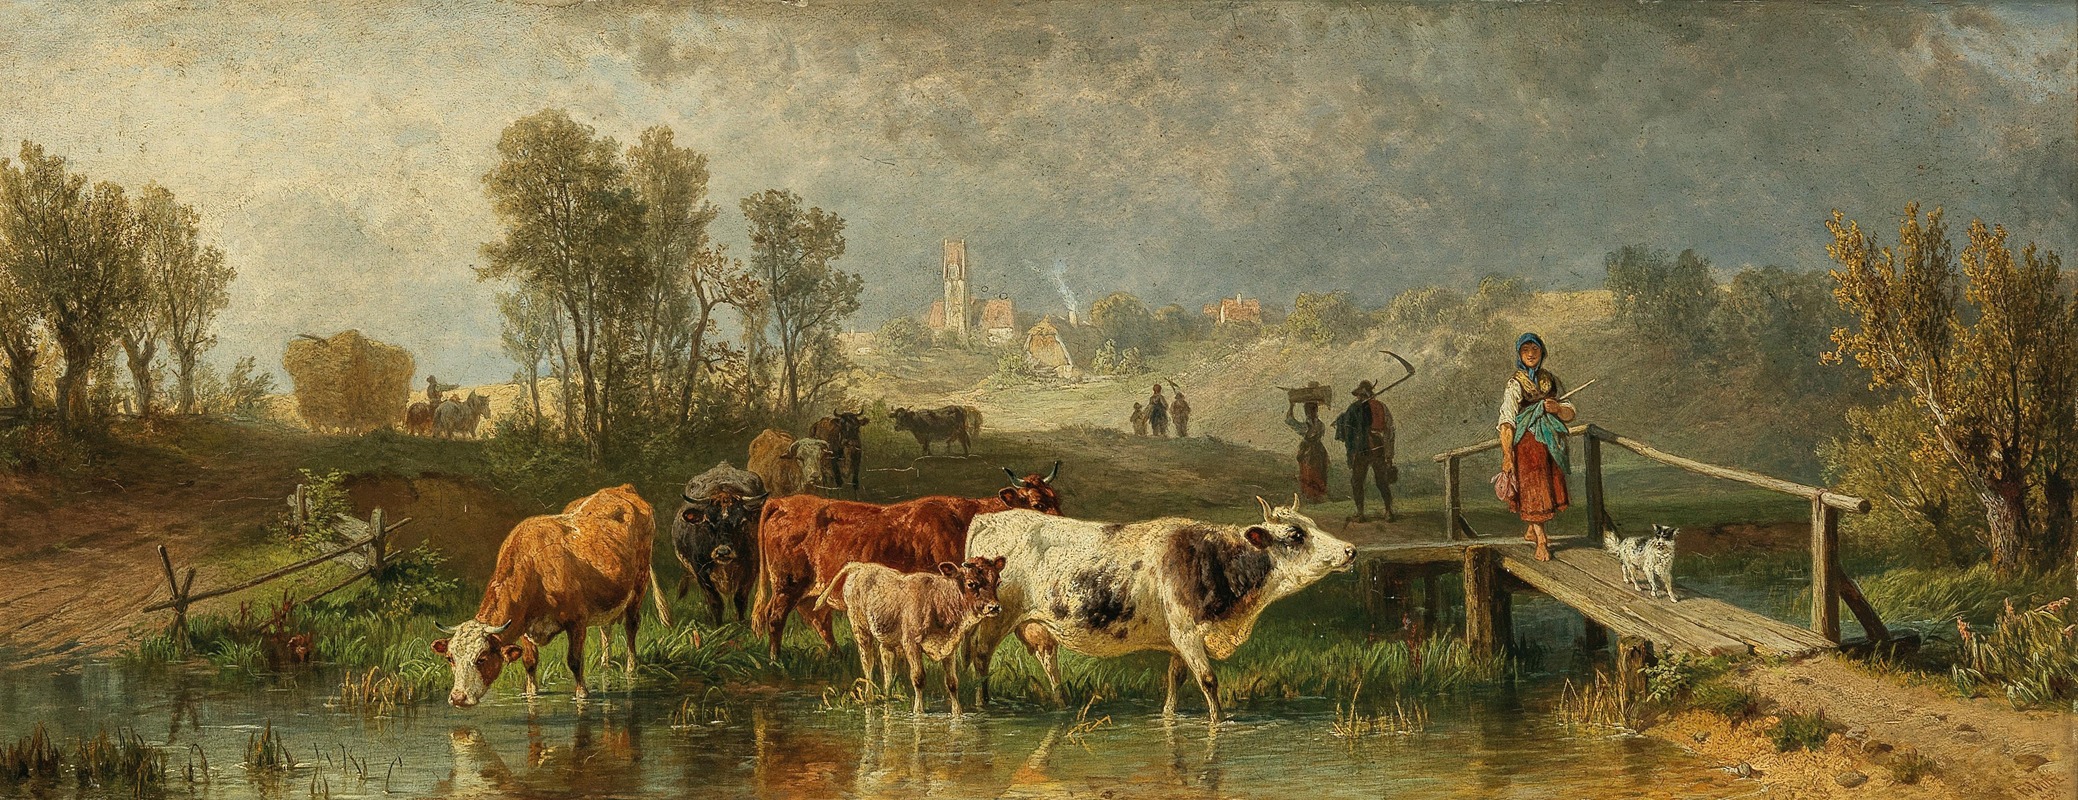 Friedrich Voltz - Returning from the Field, in the background a small village